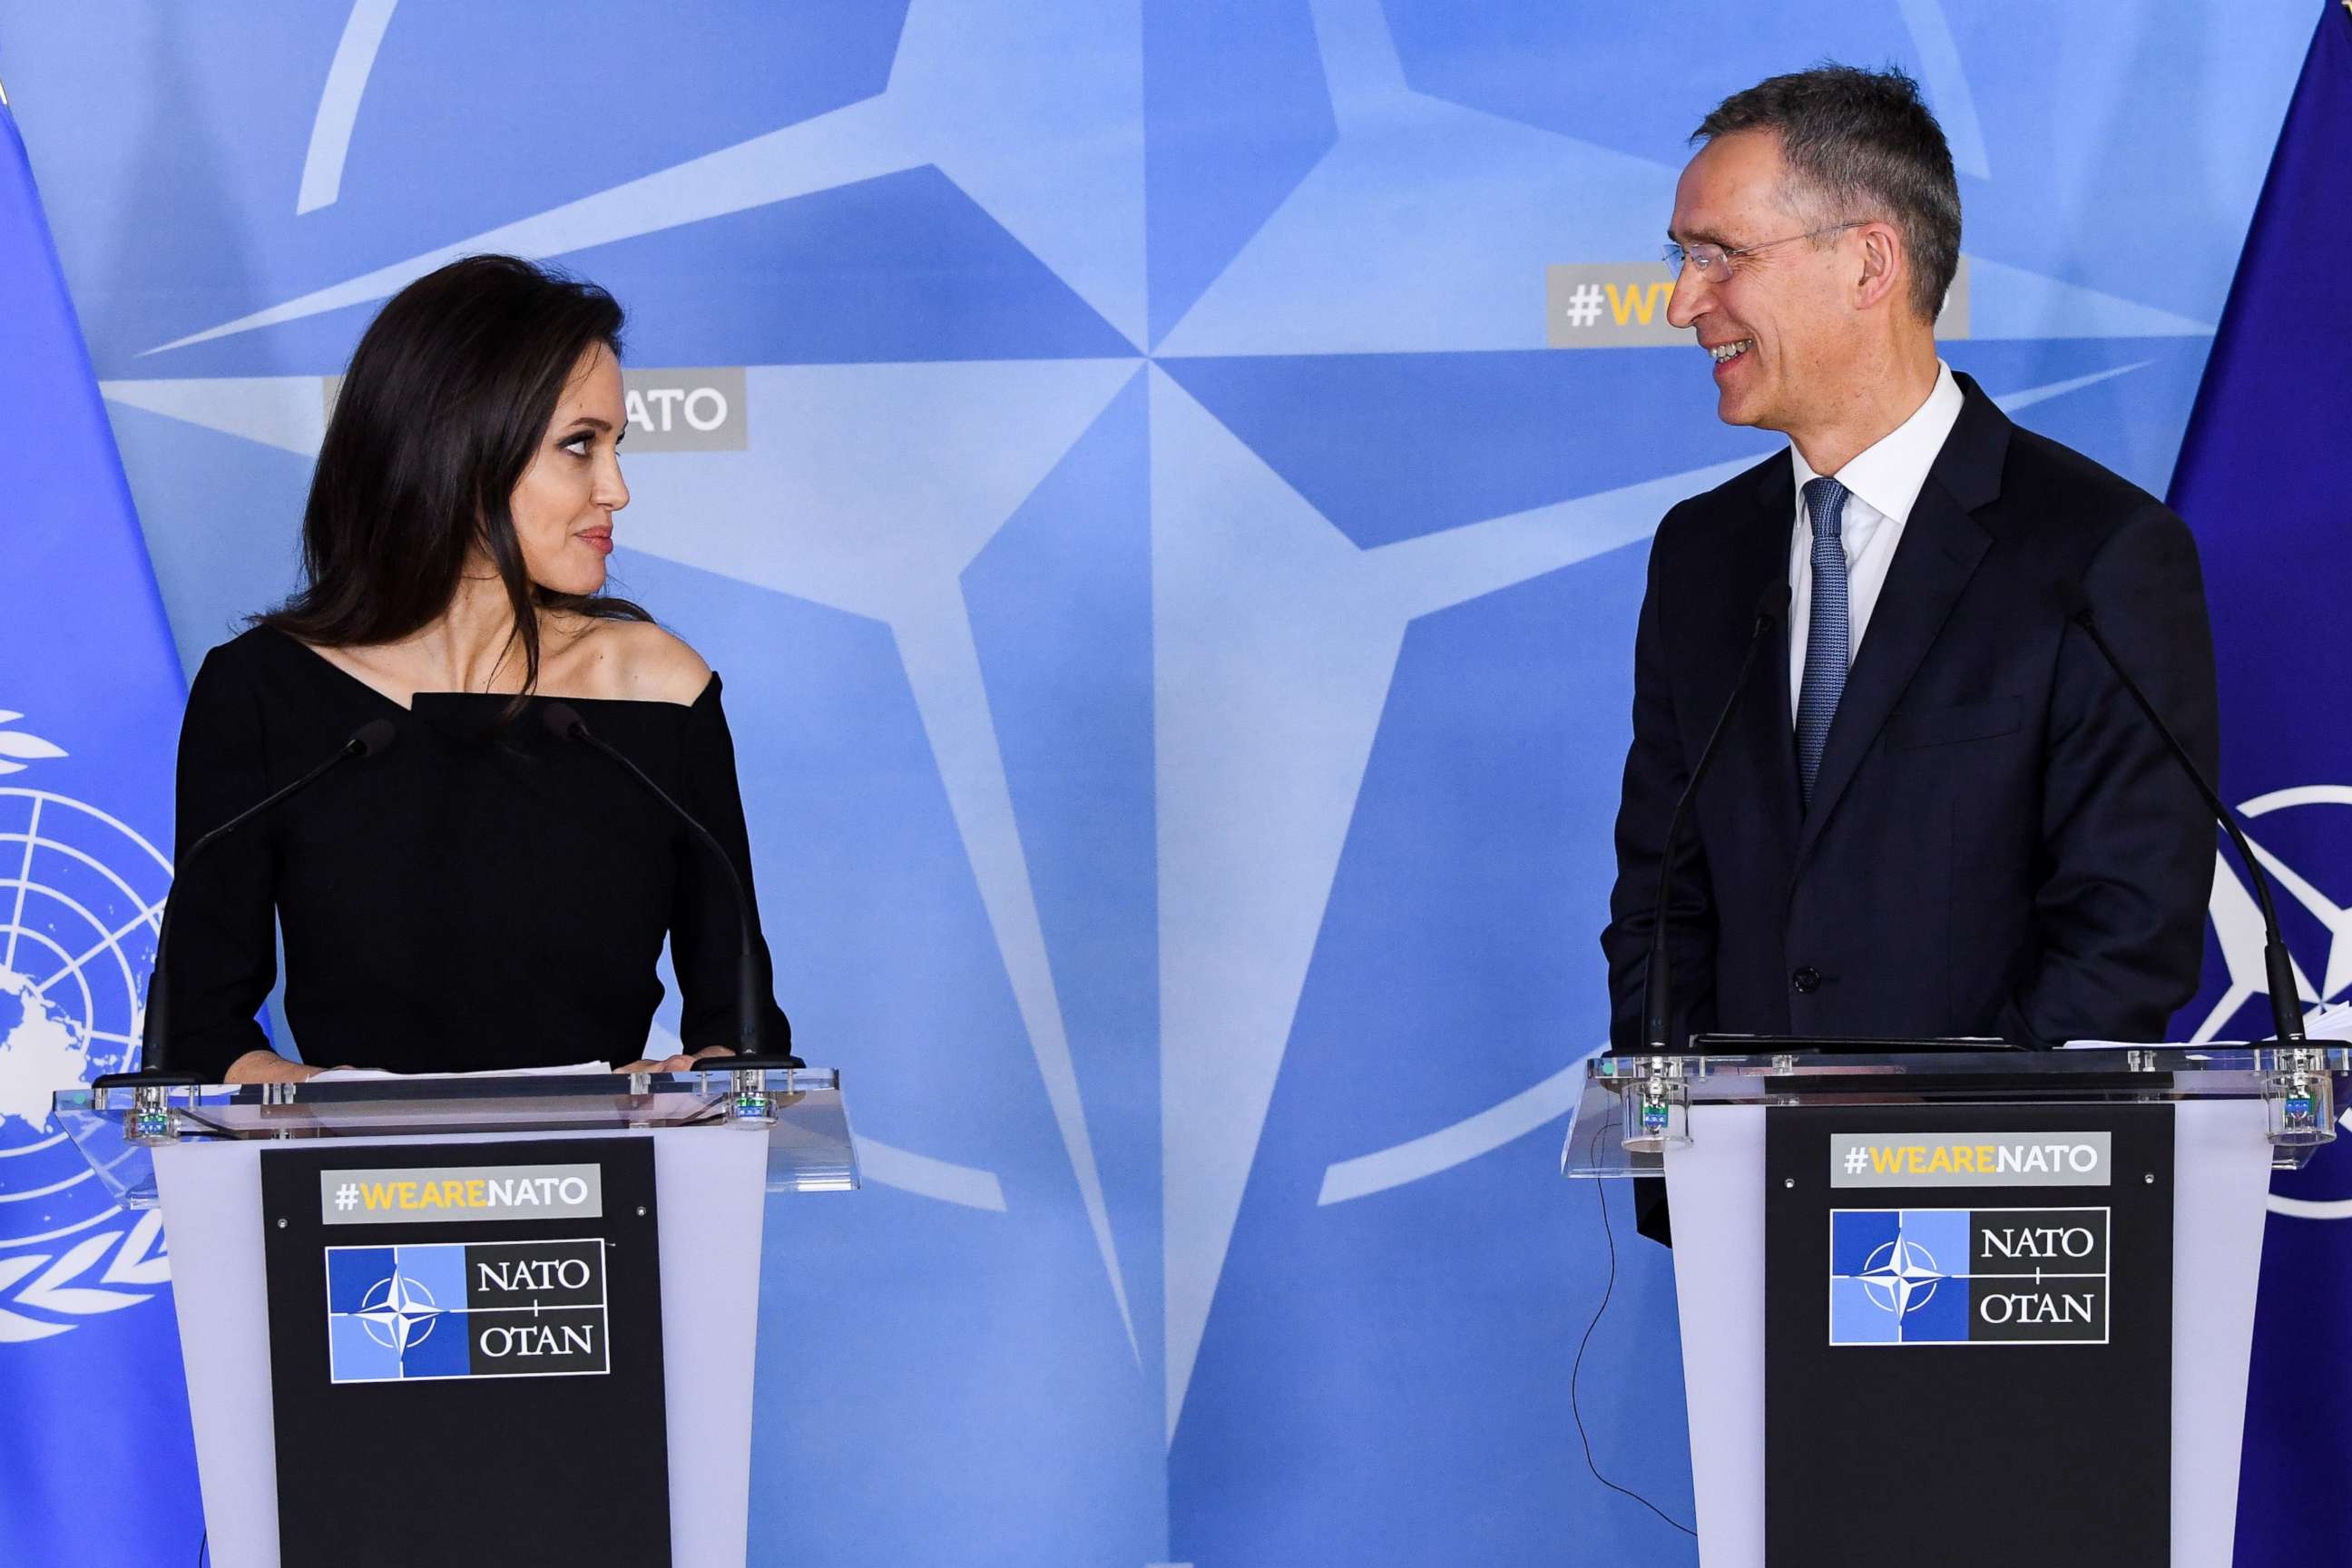 PHOTO: Special Envoy for the High Commissioner for Refugees Angelina Jolie visits NATO and holds a joint press conference with Secretary-General of NATO Jens Stoltenberg, Brussels, Jan. 31, 2018.